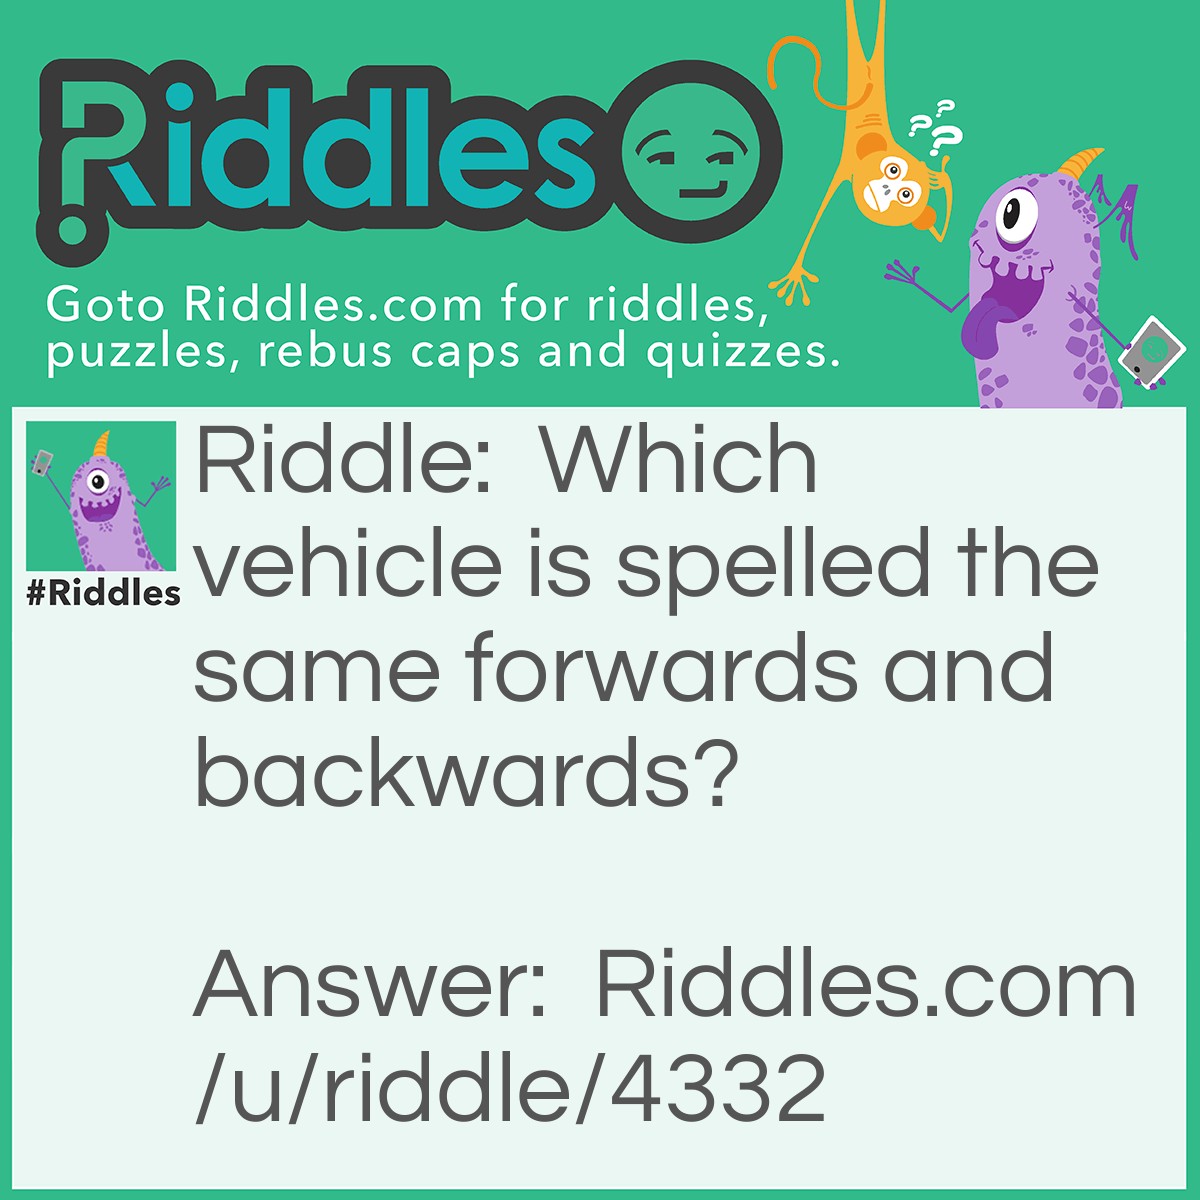 Riddle: Which vehicle is spelled the same forwards and backwards? Answer: RACECAR.